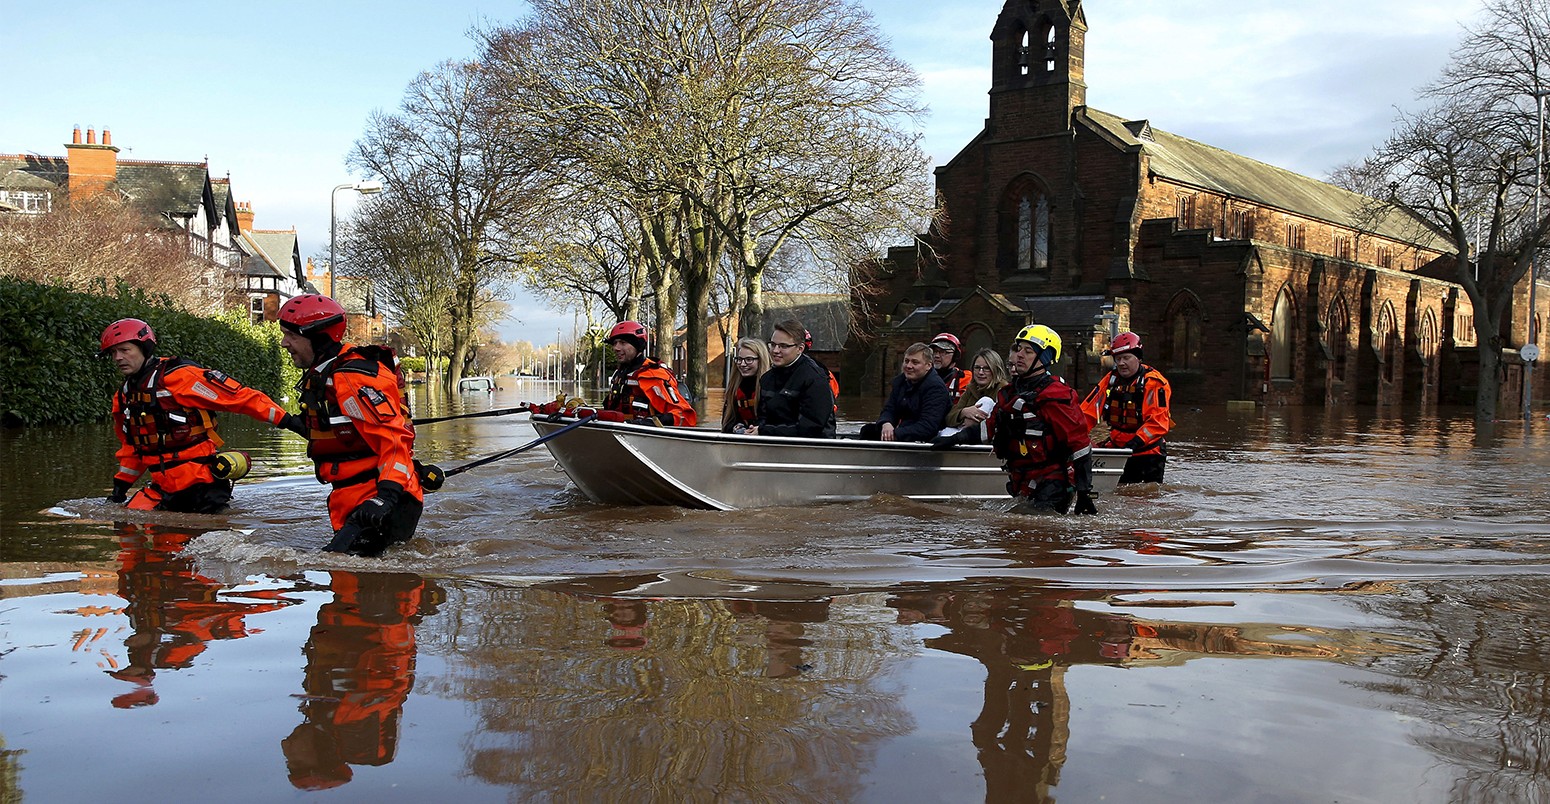 Rescue workers evacuate local residents by boat from a flooded residential street in Carlisle, Britain